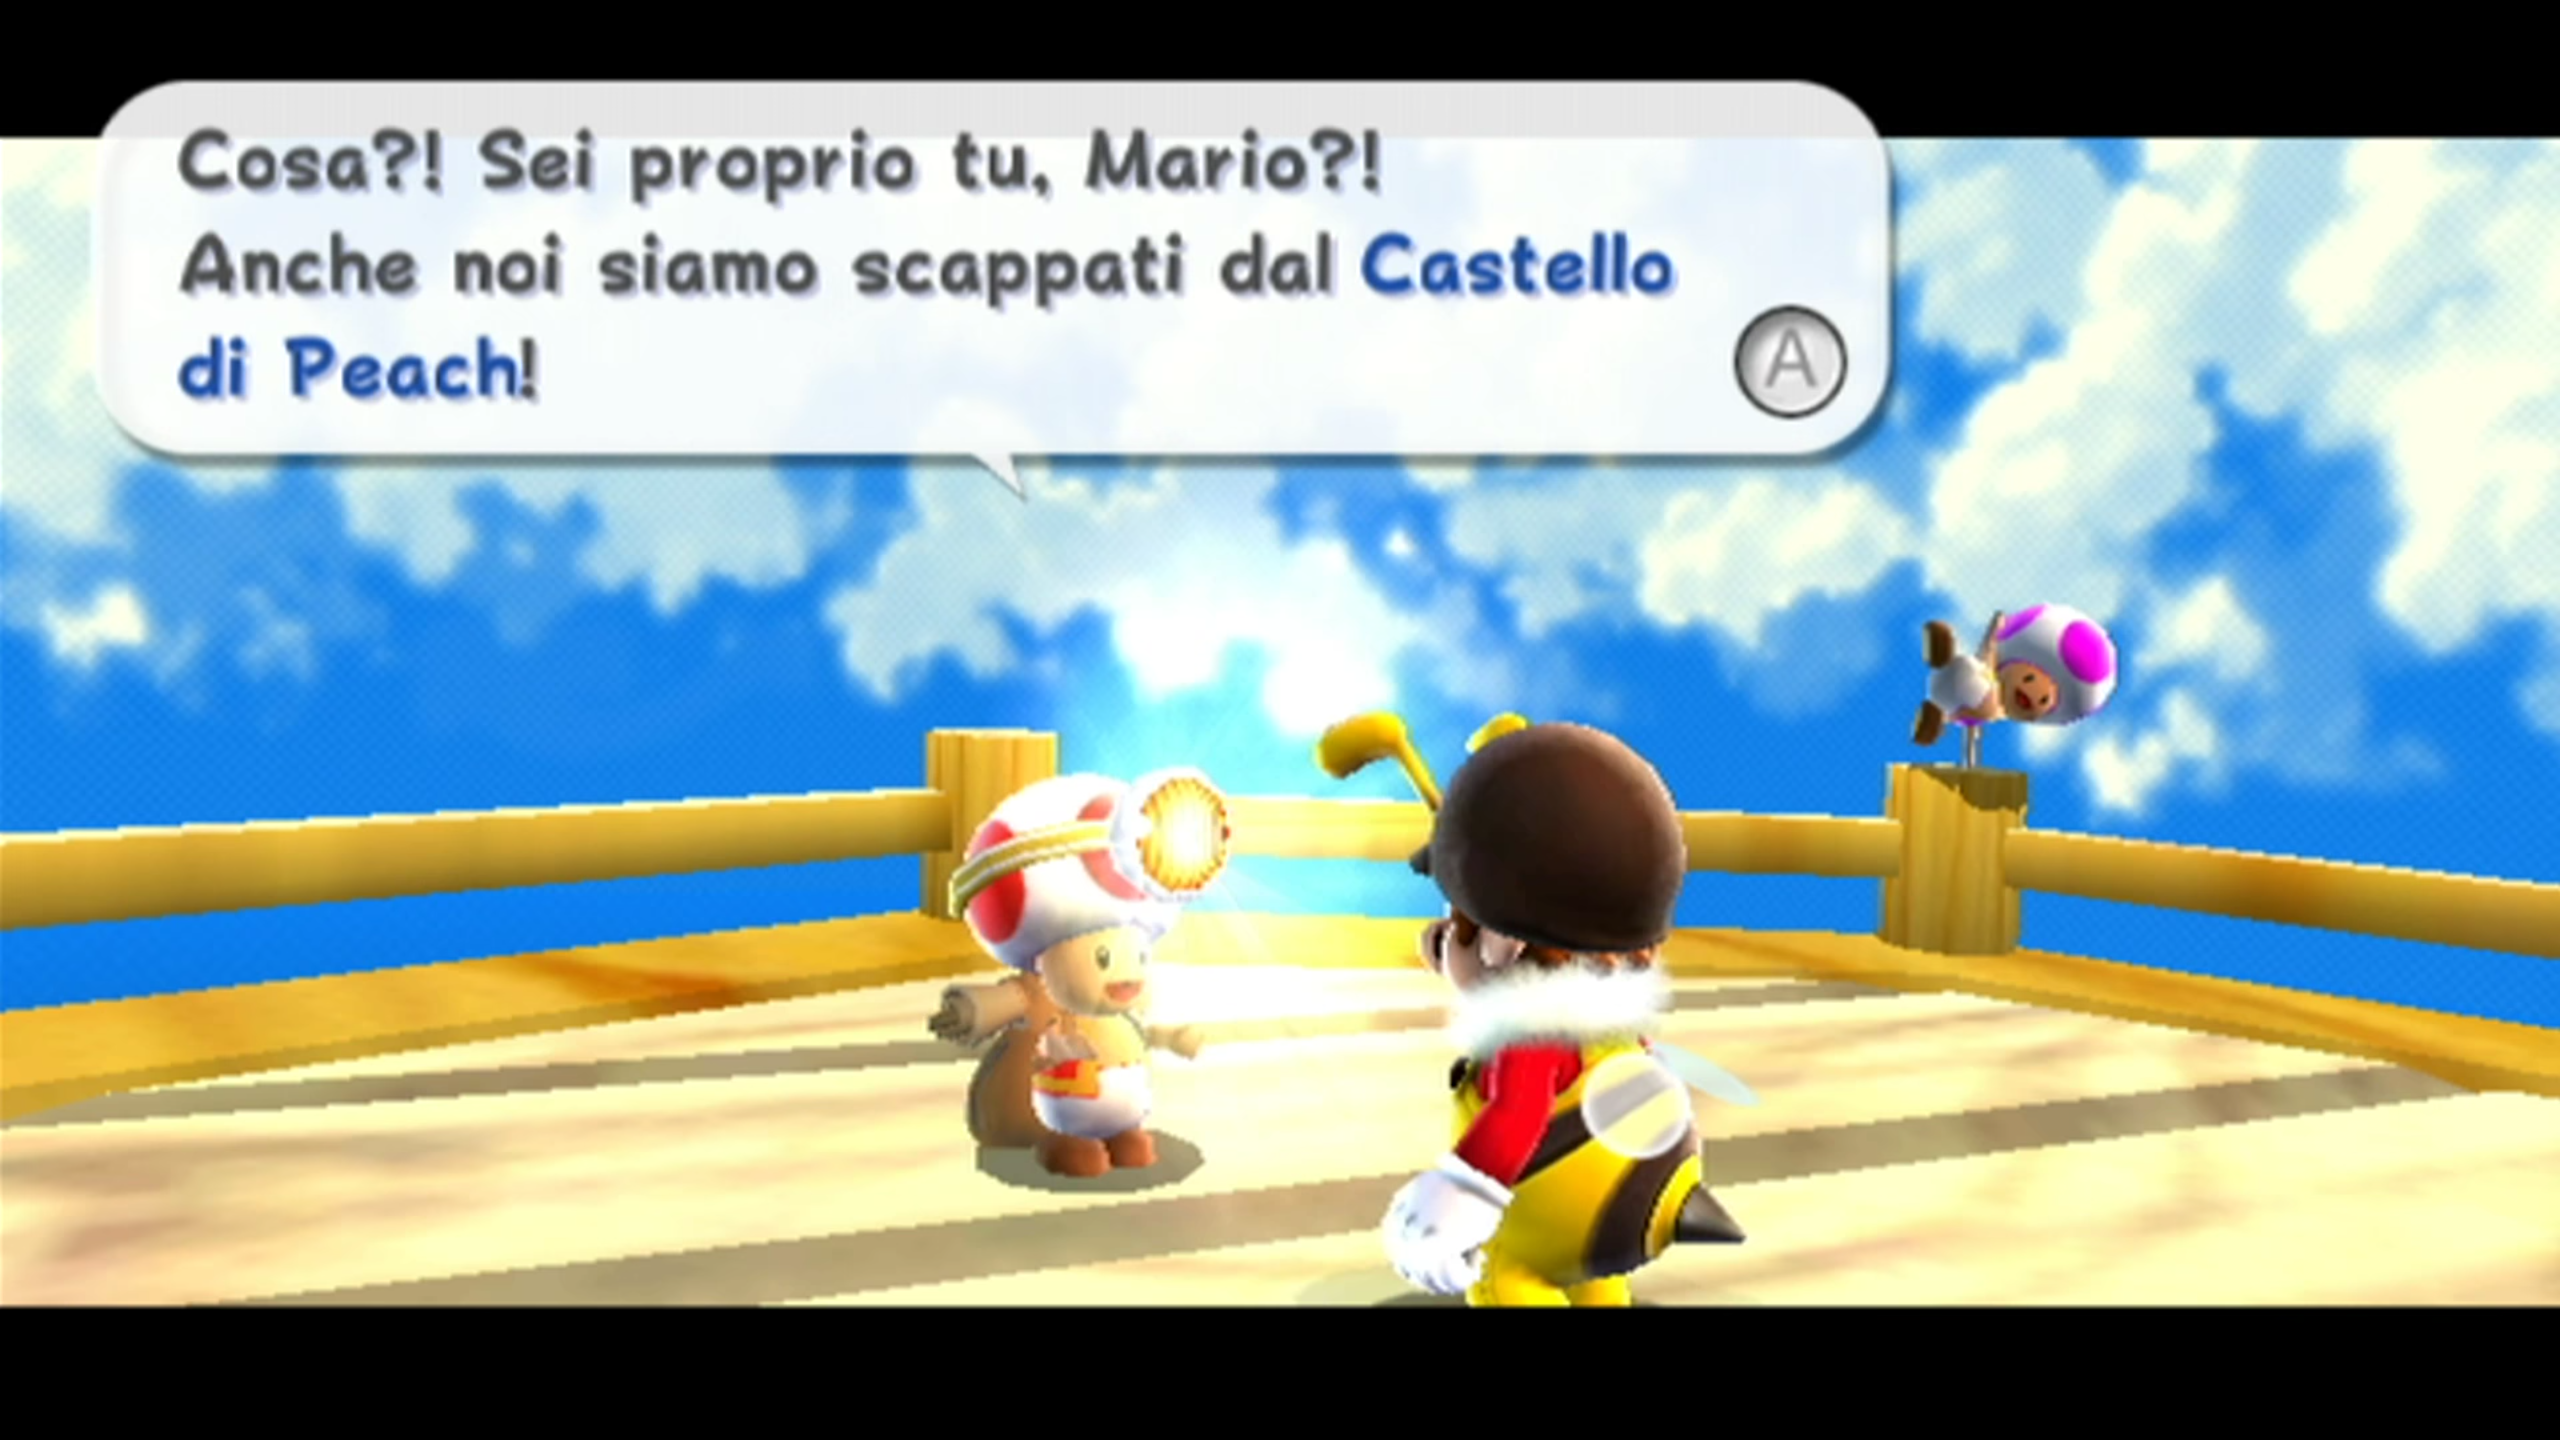 https://www.mariowiki.it/images/0/06/Capitan_Toad_e_Mario_Ape.png